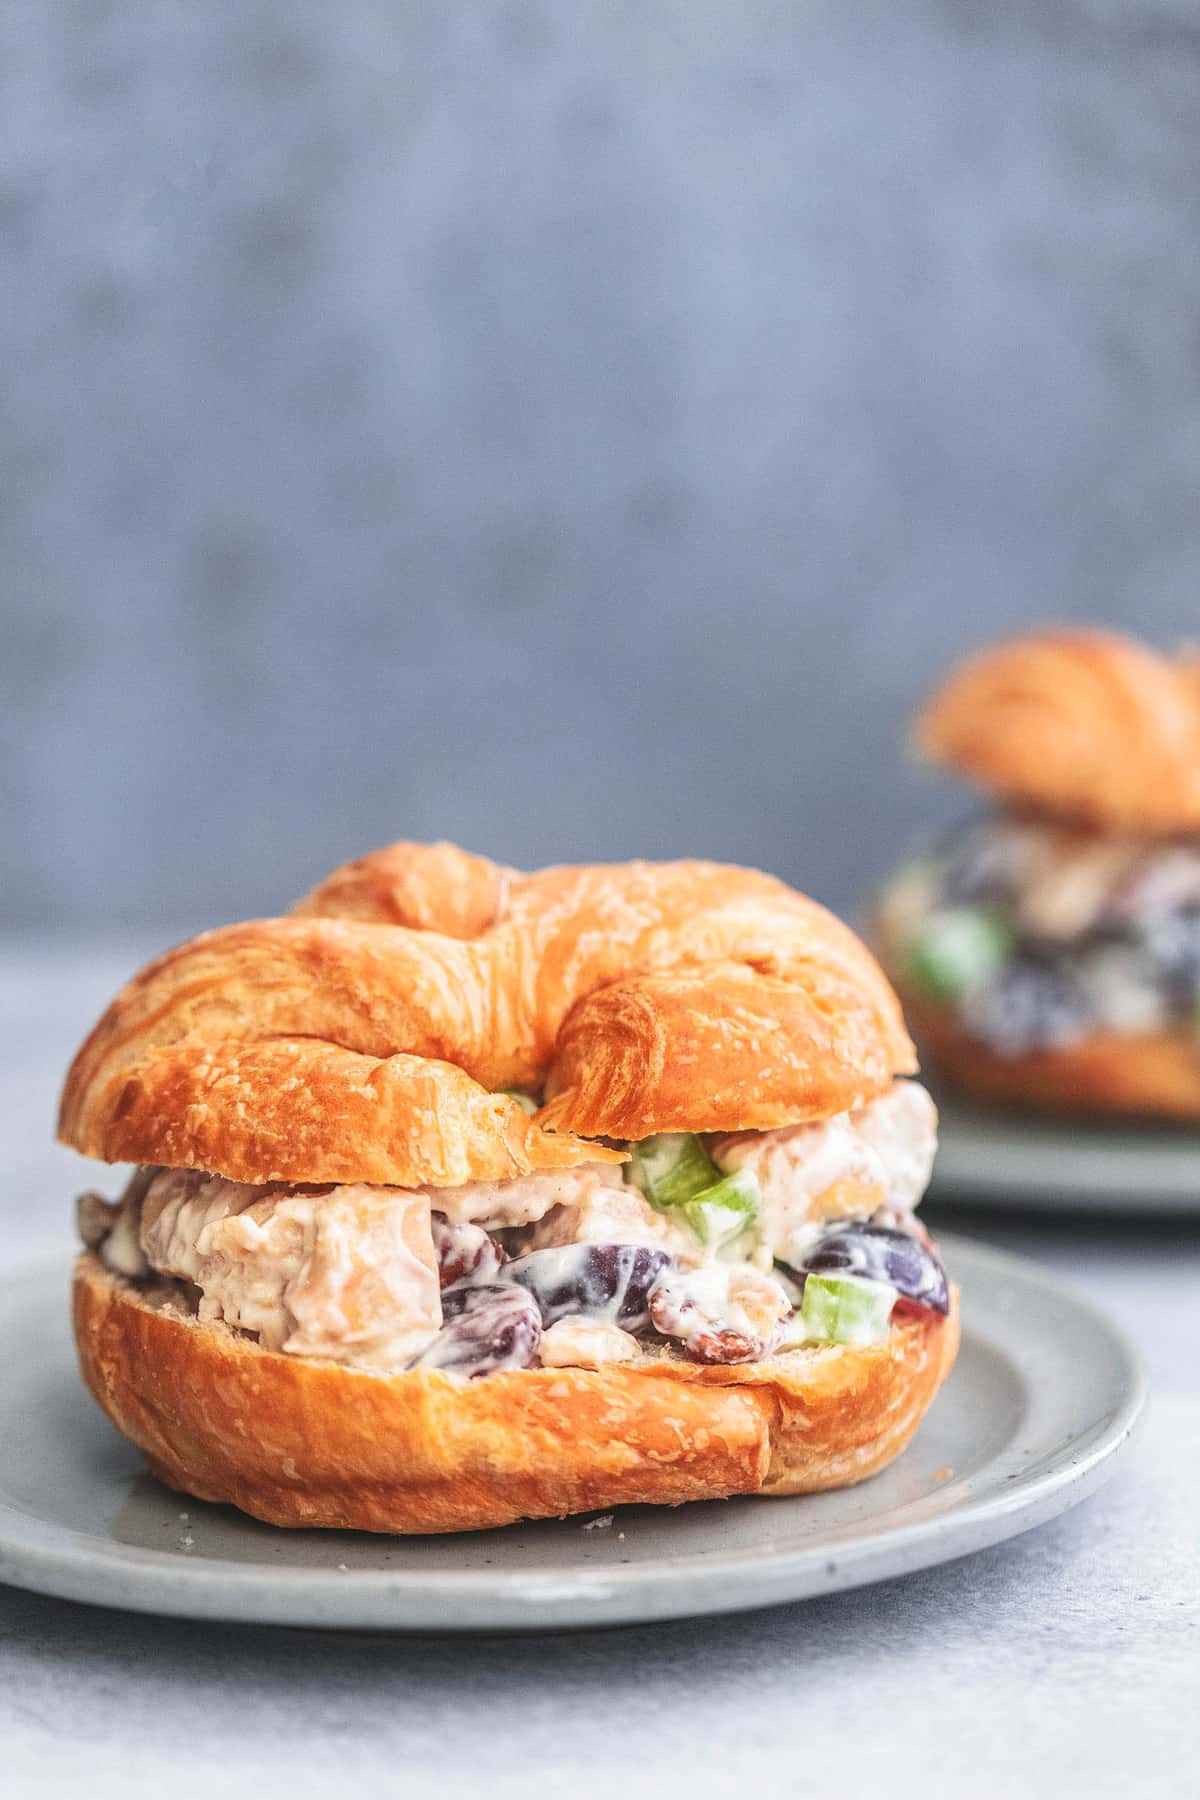 chicken salad sandwich with grapes on a plate.